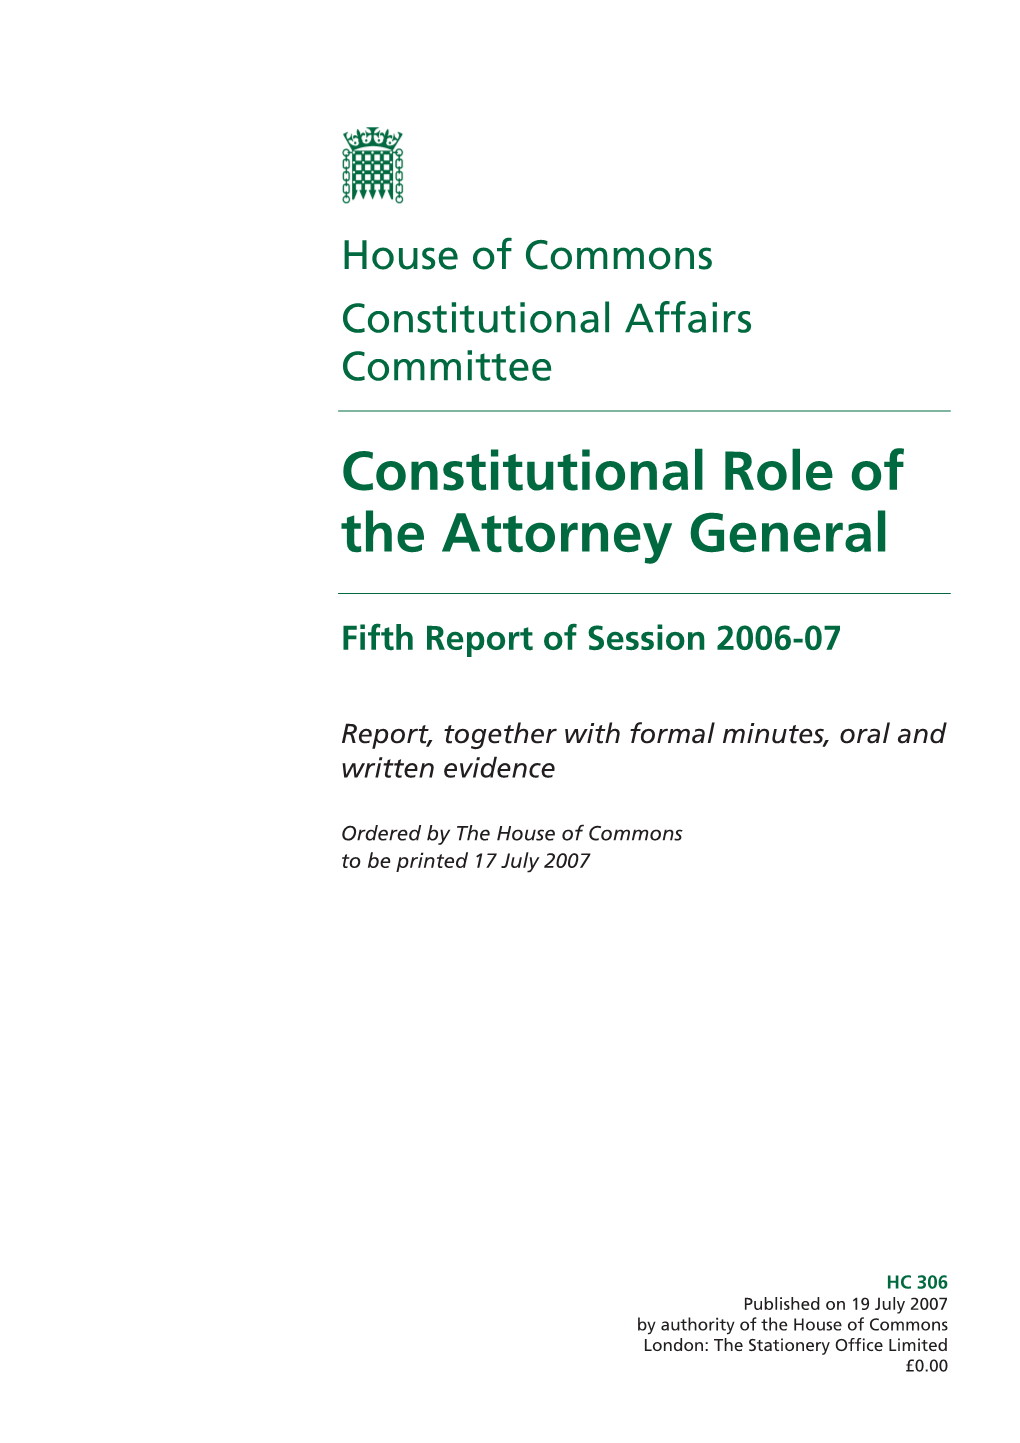 Constitutional Role of the Attorney General